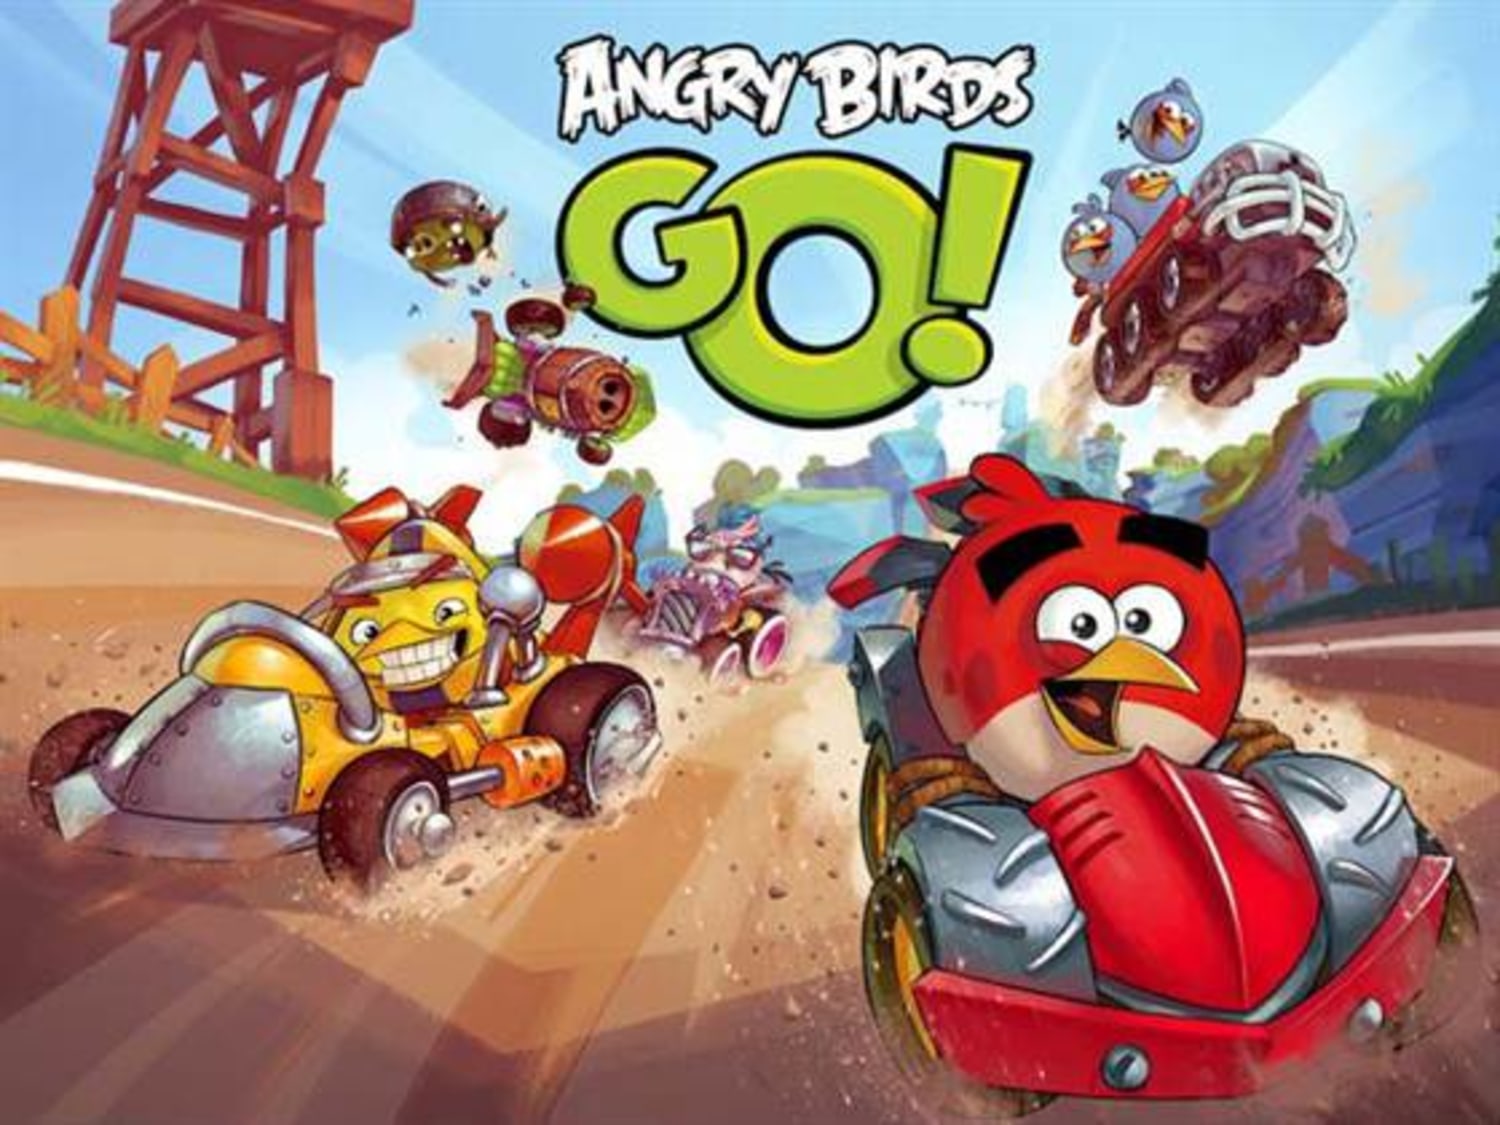 Angry Birds Go!': A good racing game on a collision course with your wallet